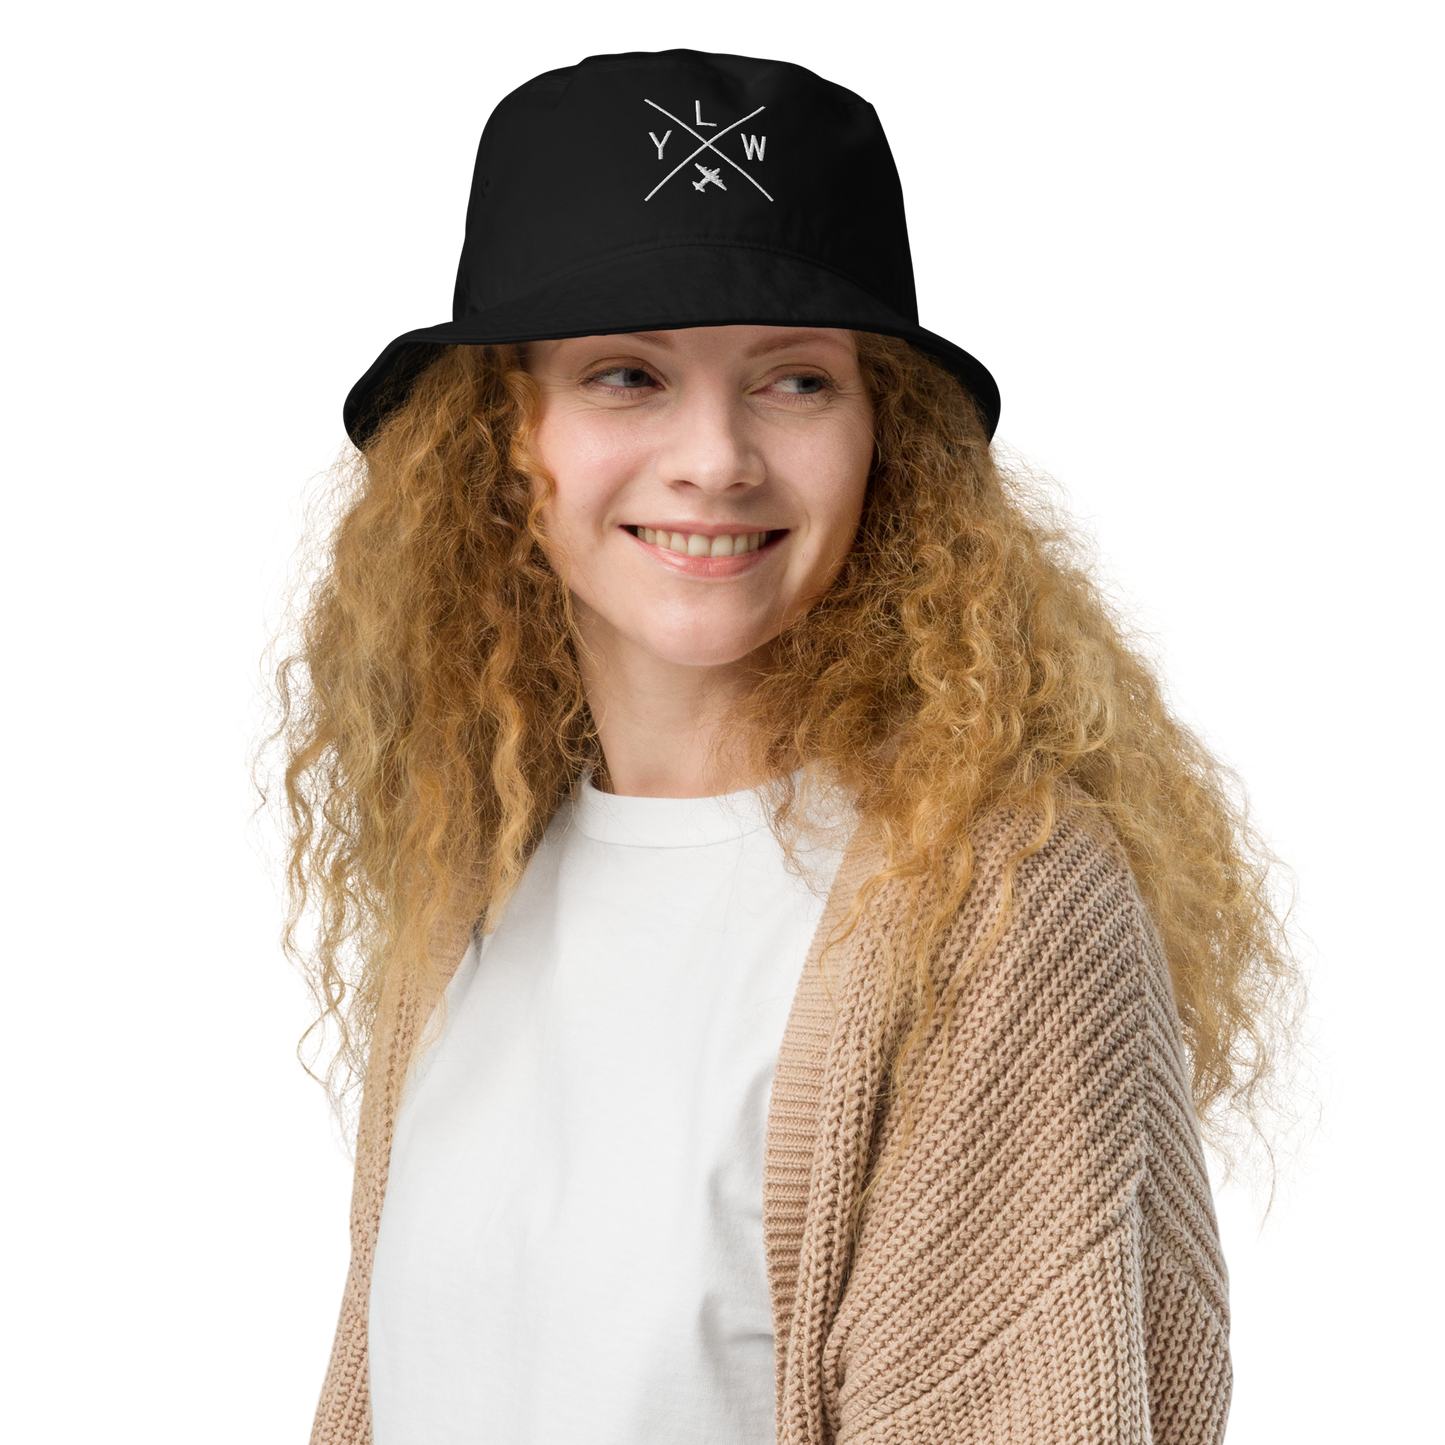 YHM Designs - YLW Kelowna Organic Cotton Bucket Hat - Crossed-X Design with Airport Code and Vintage Propliner - White Embroidery - Image 04